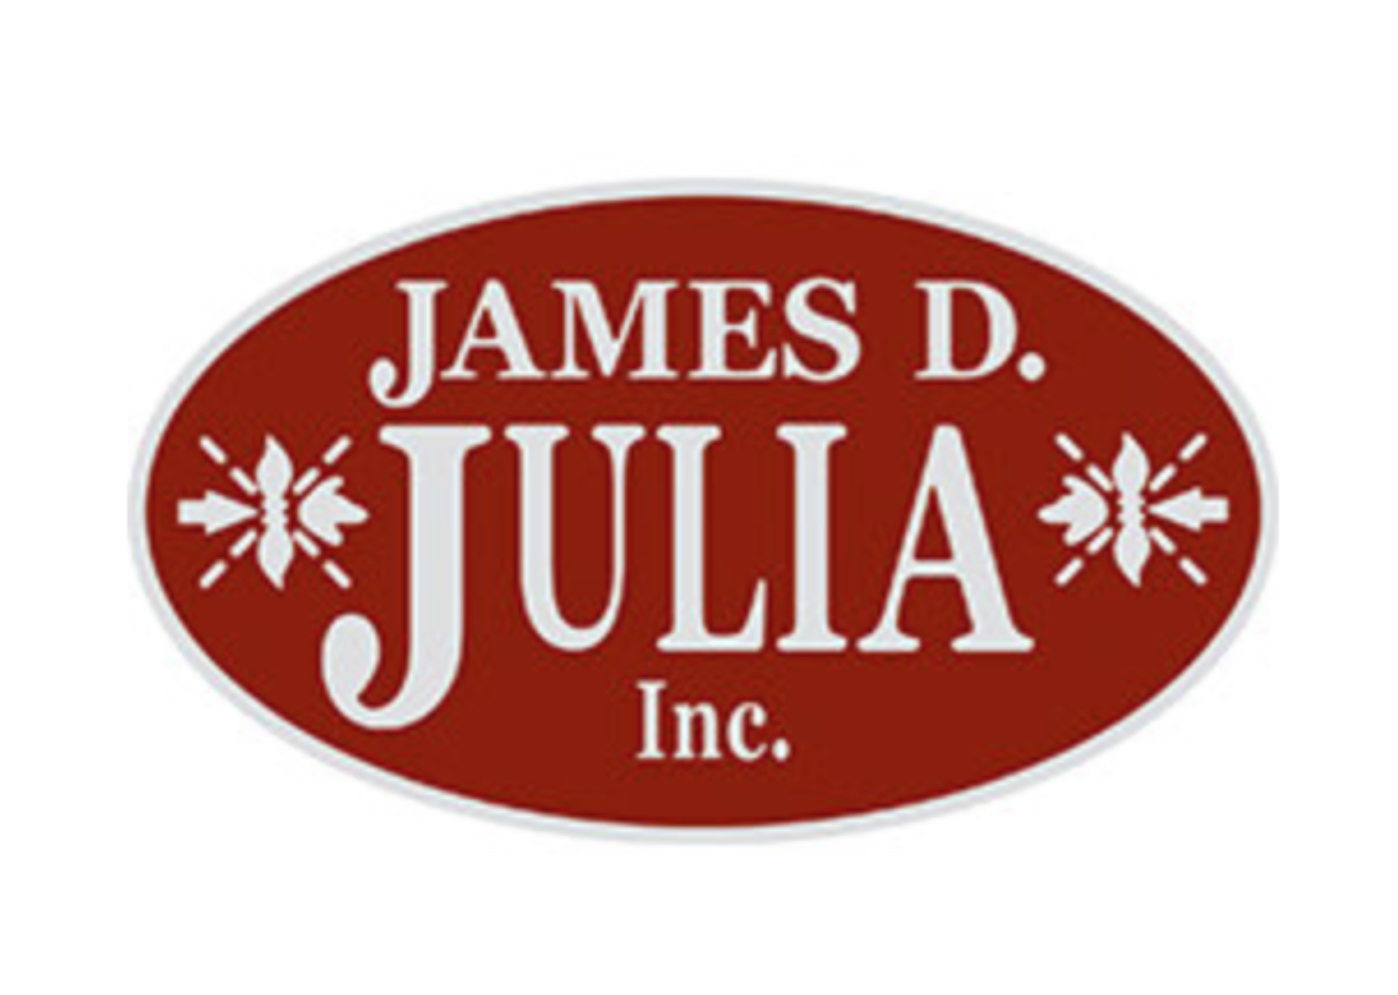 James D. Julia, located in Fairfield, ME and Woburn, MA.